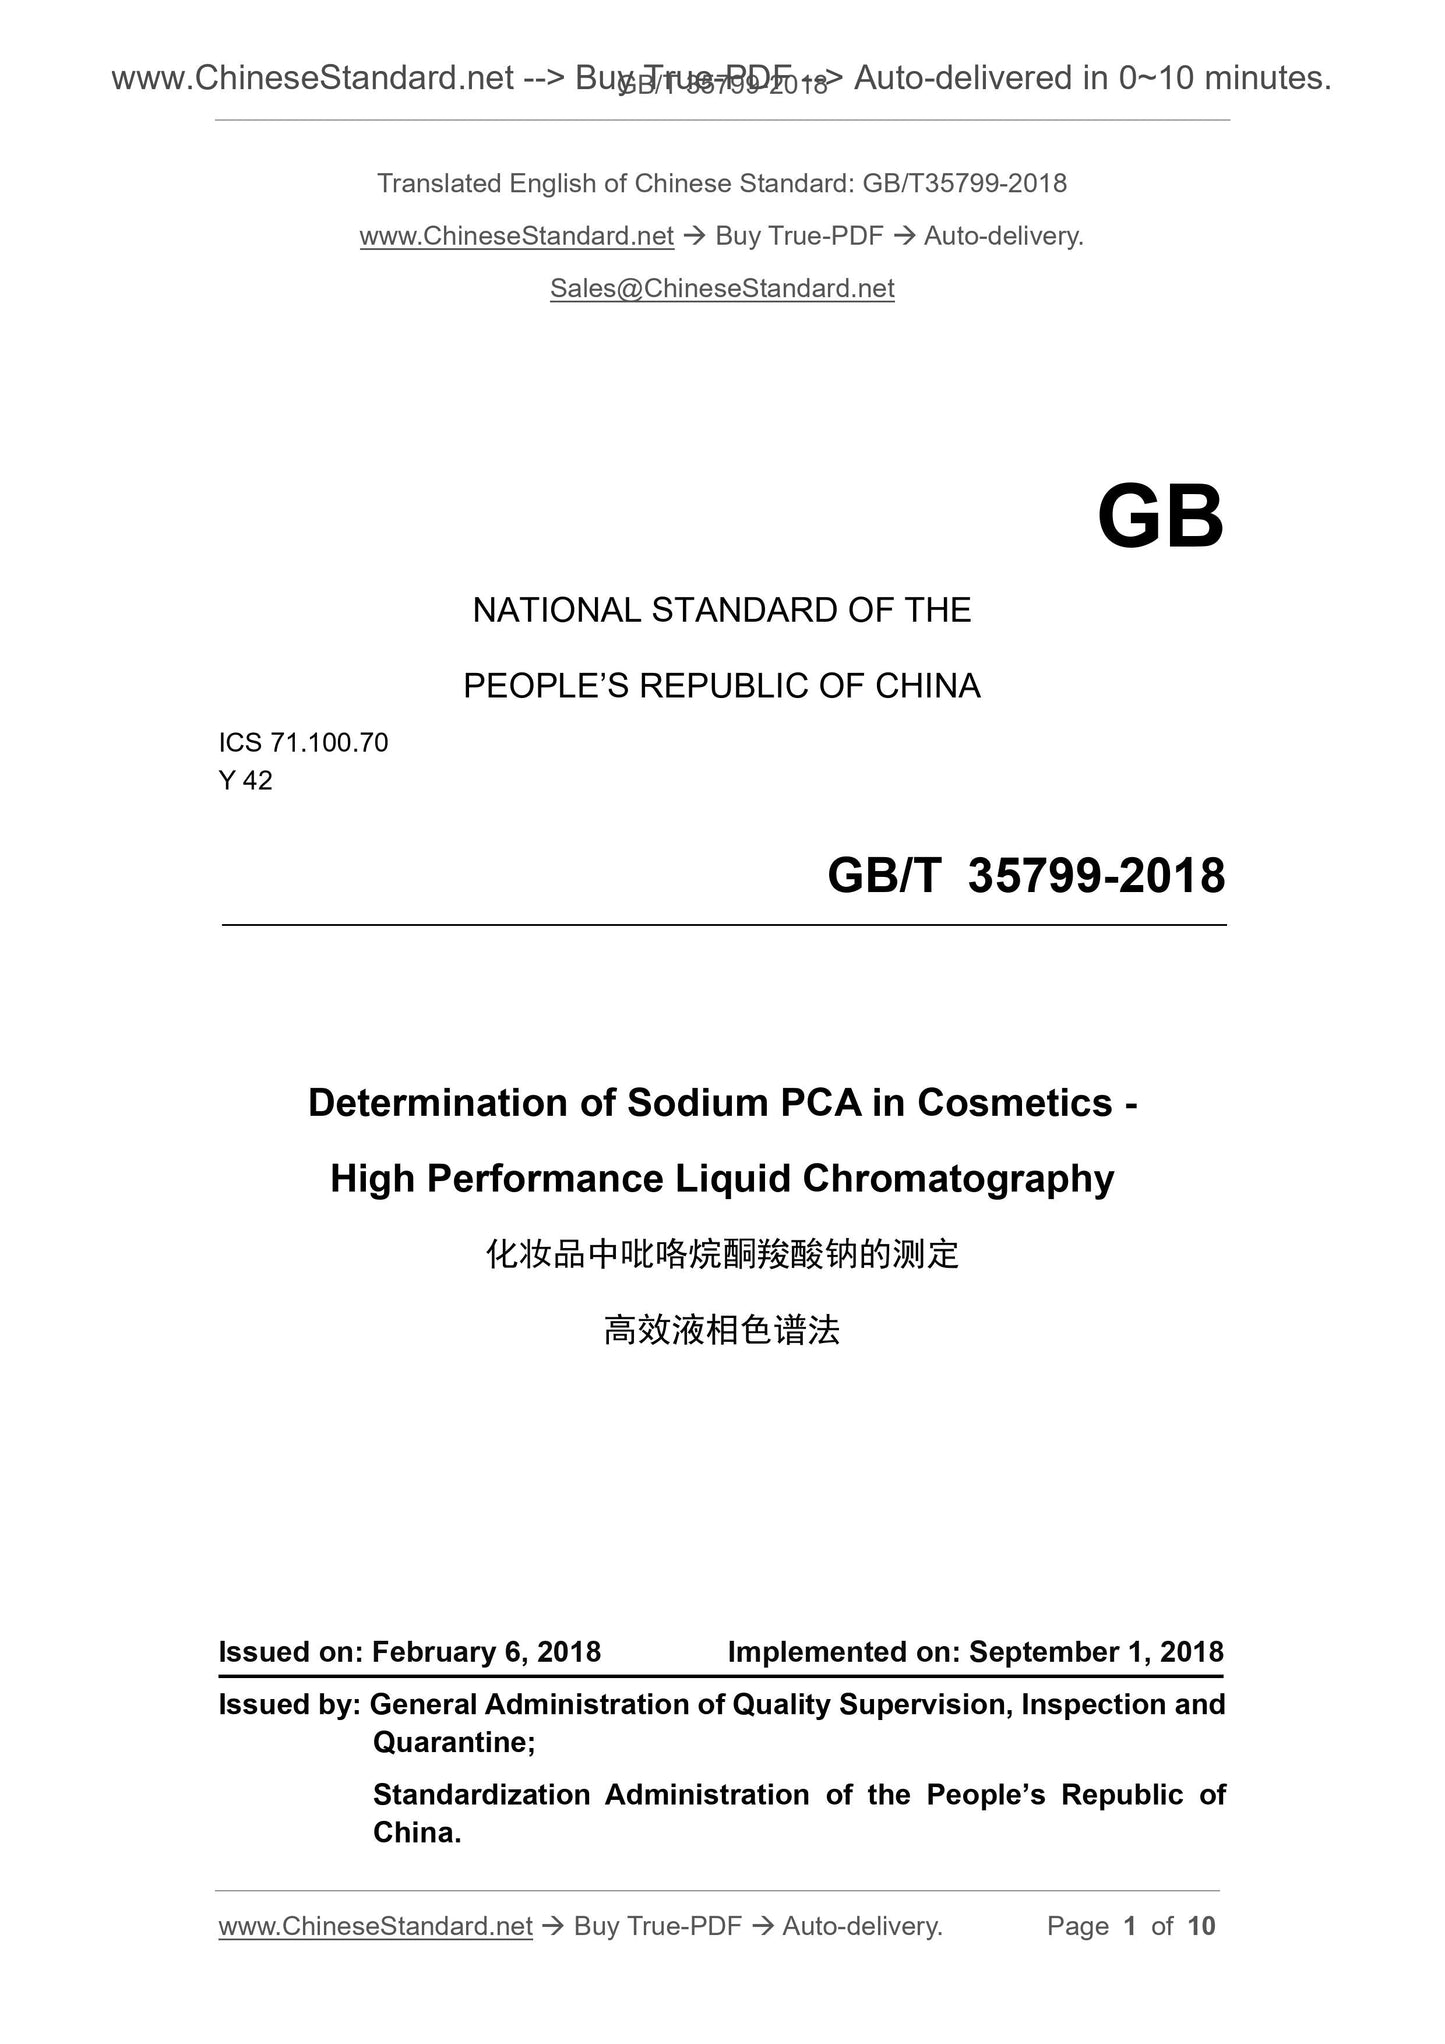 GB/T 35799-2018 Page 1